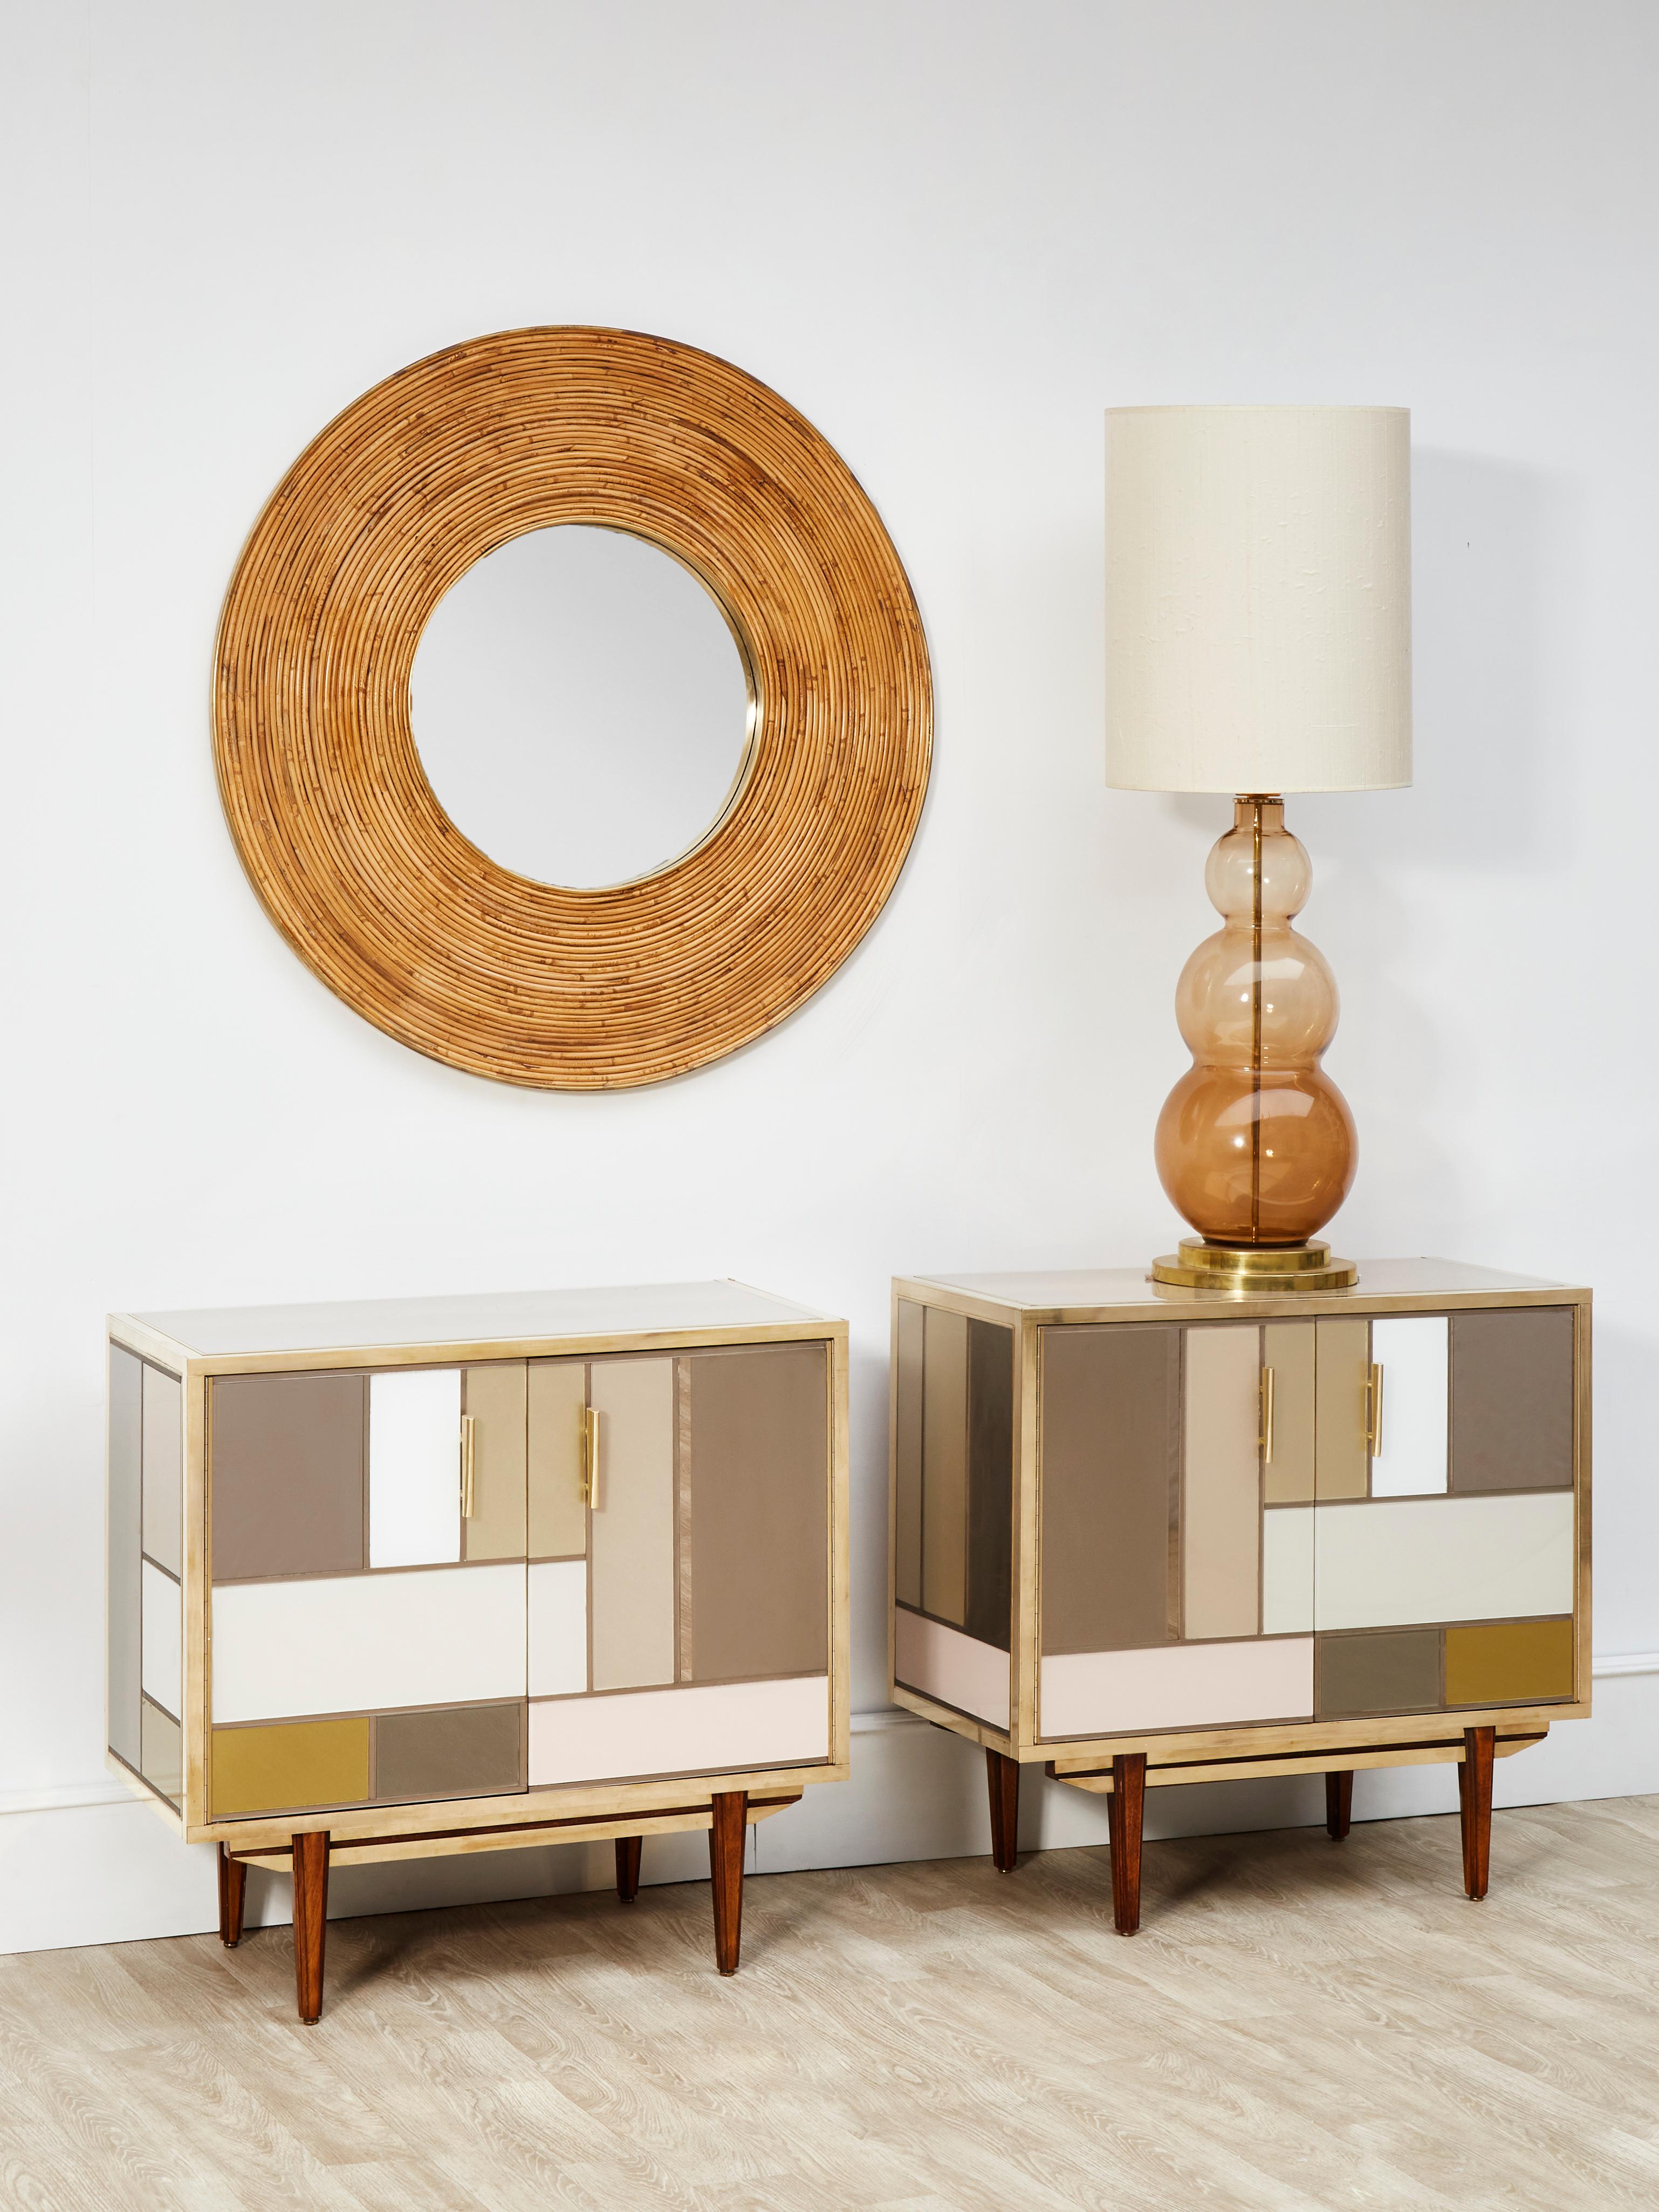 Pair of vintage wooden cabinets entirely restored and customized with tainted mirrors and brass inlays.
Italy, 1970s.